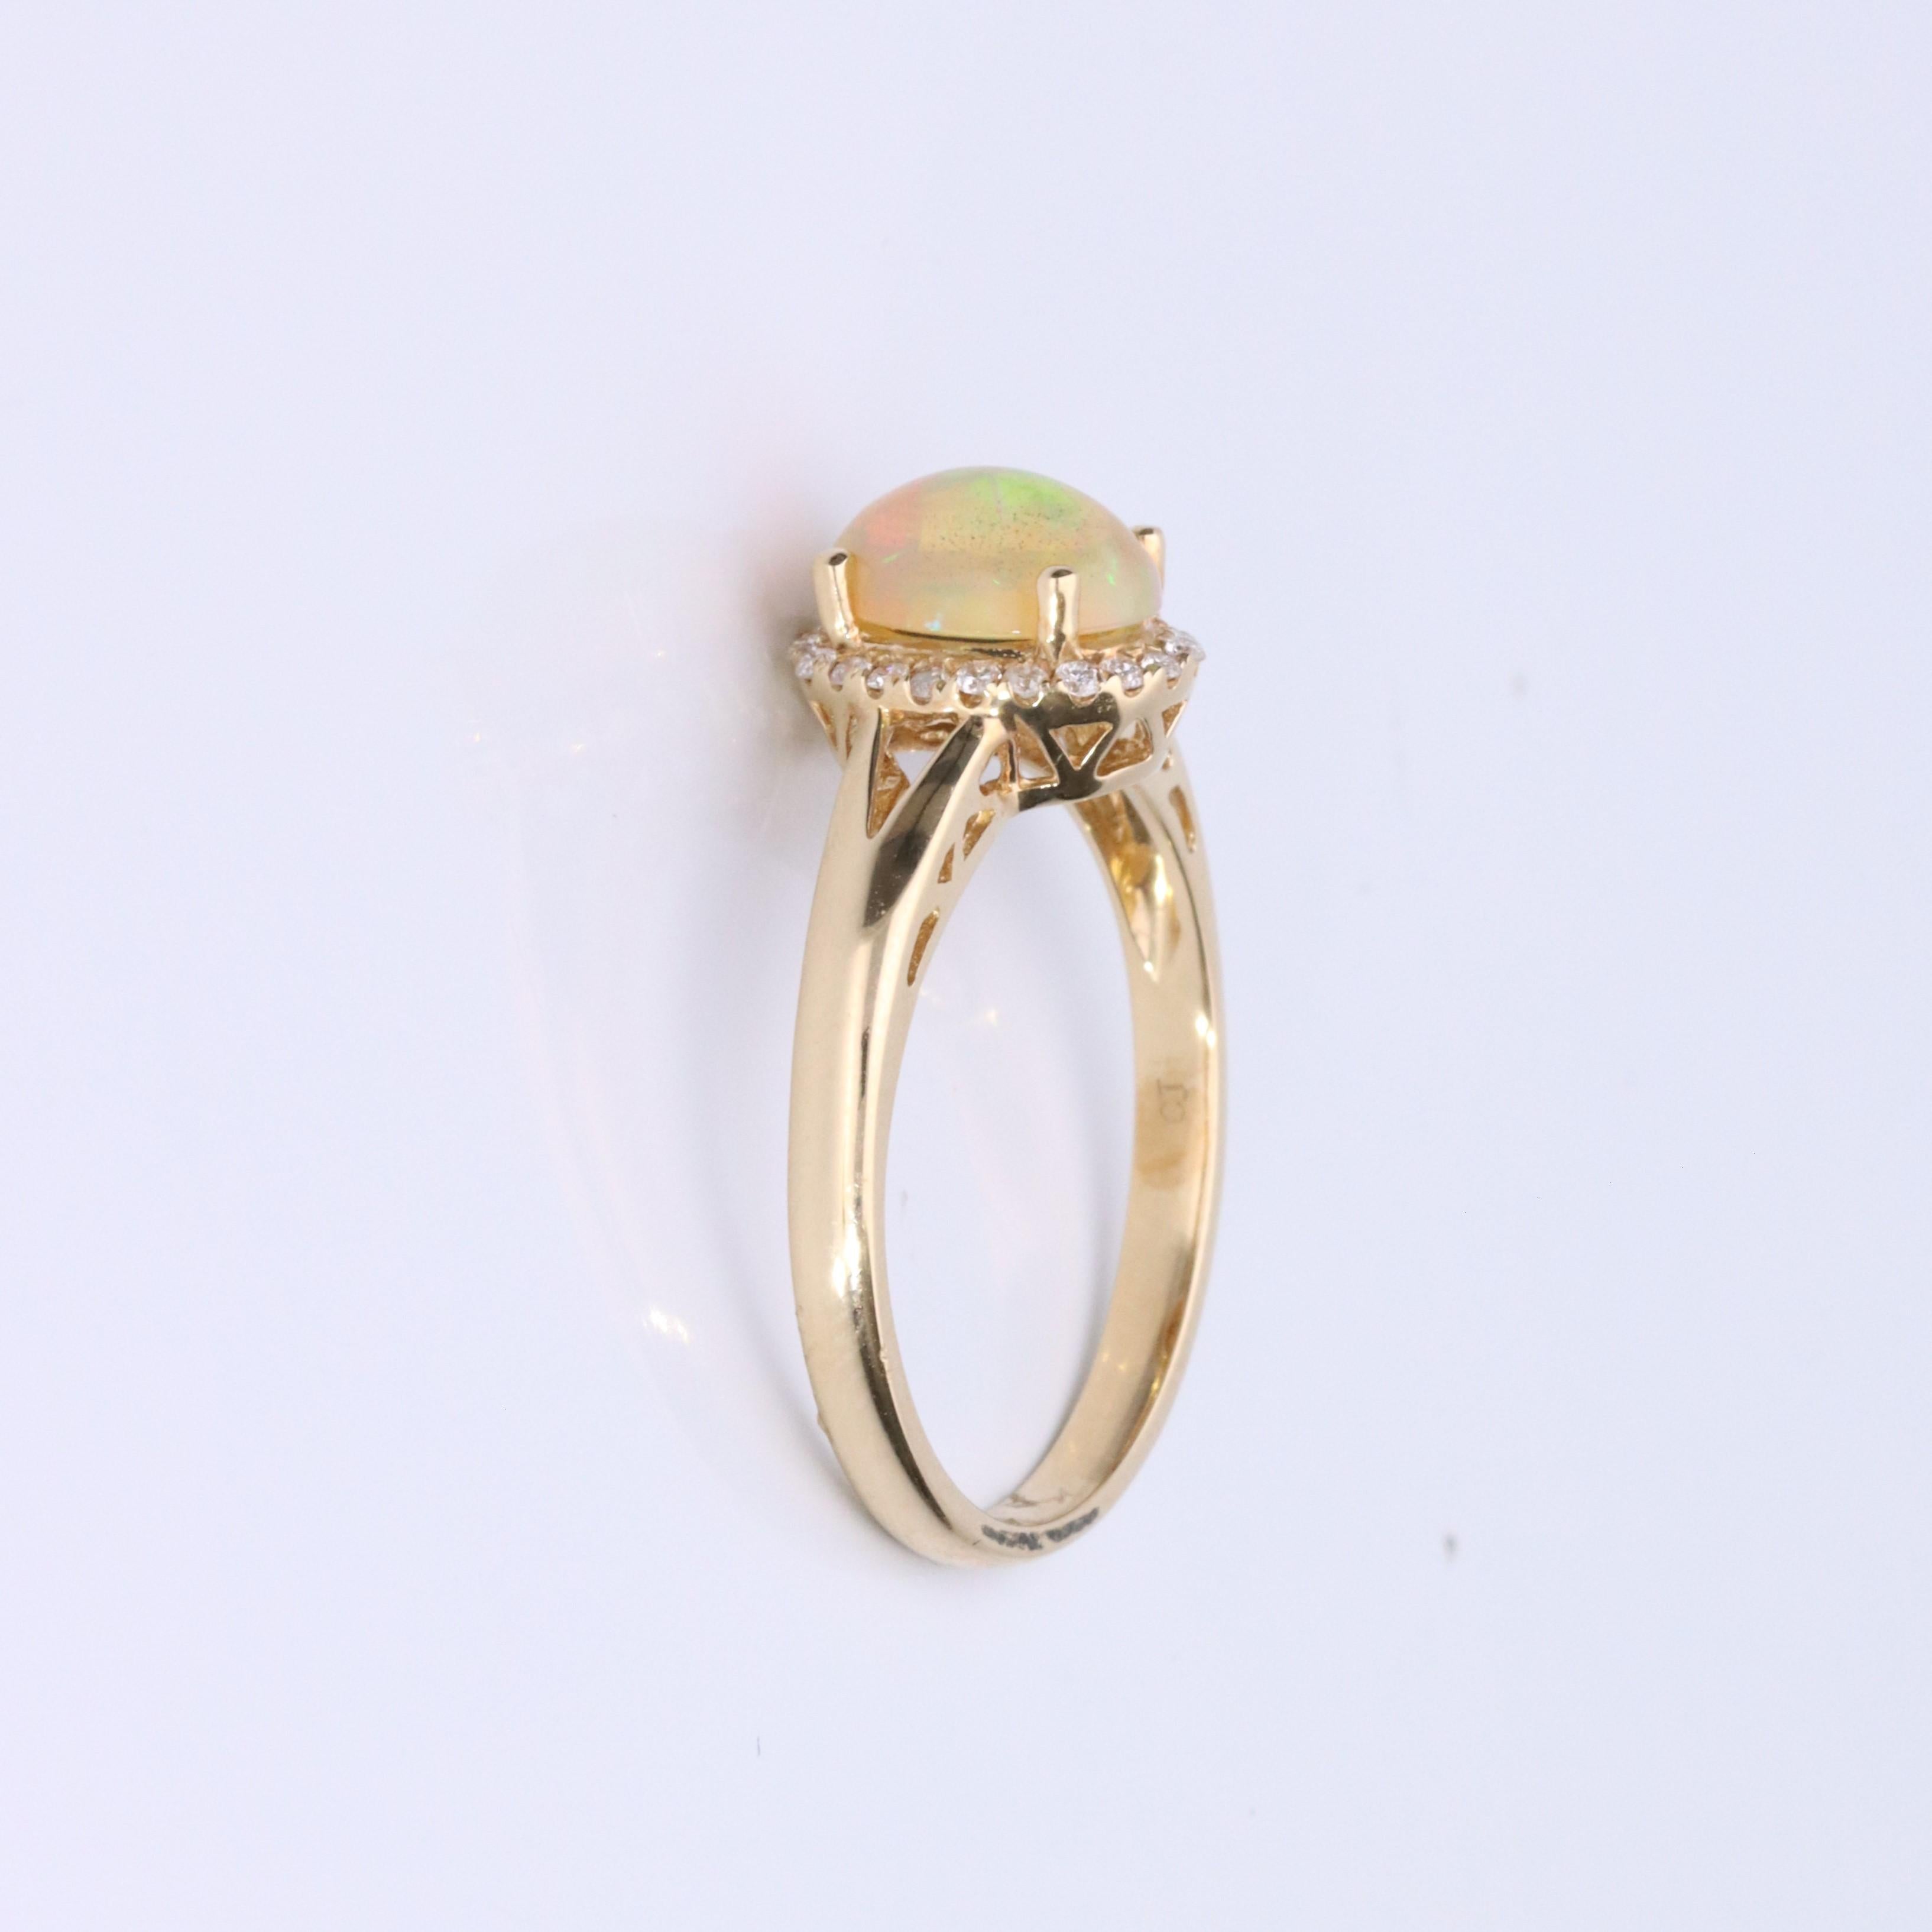 Decorate yourself in elegance with this Ring is crafted from 14-karat Yellow Gold by Gin & Grace. This Ring is made up of Oval-Cab (1 pcs) 0.89 carat Ethiopian Opal and Round-cut White Diamond (22 Pcs) 0.11 carat. This Ring is weight 2.34 grams.